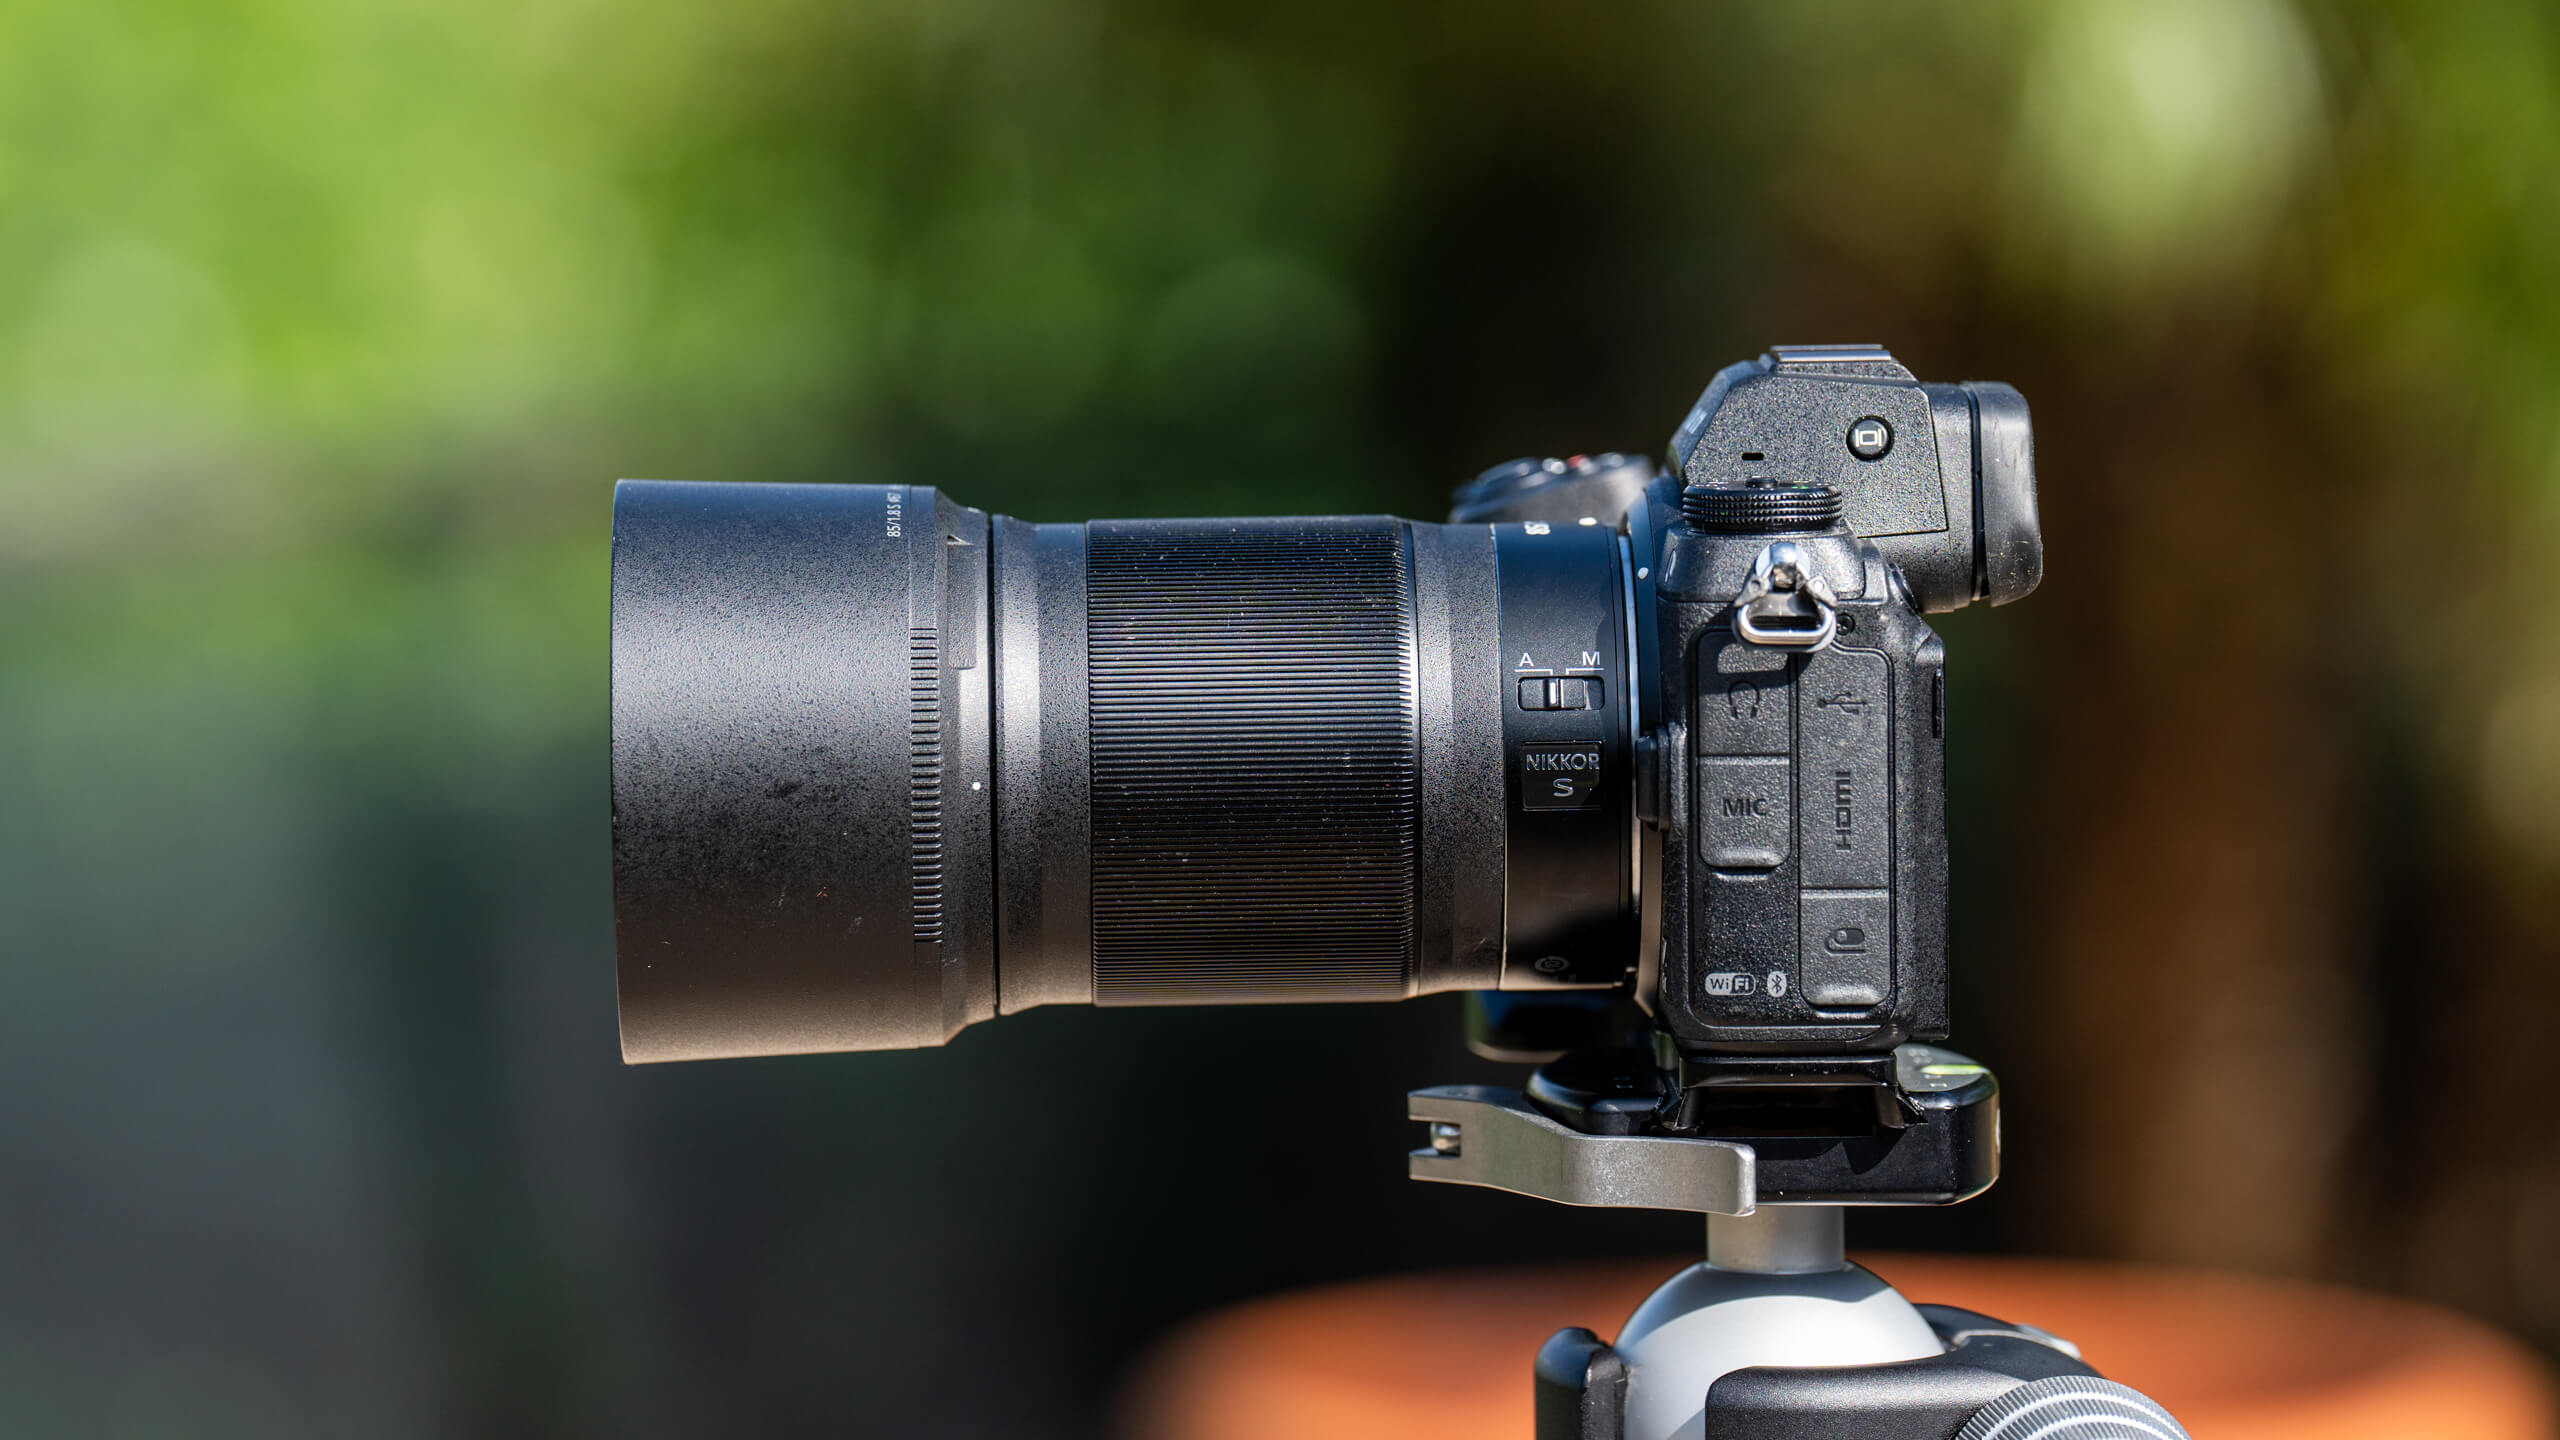 Cloud tent Bend Nikon Z 85mm f/1.8 S review: The perfect balance of price and performance -  Photofocus